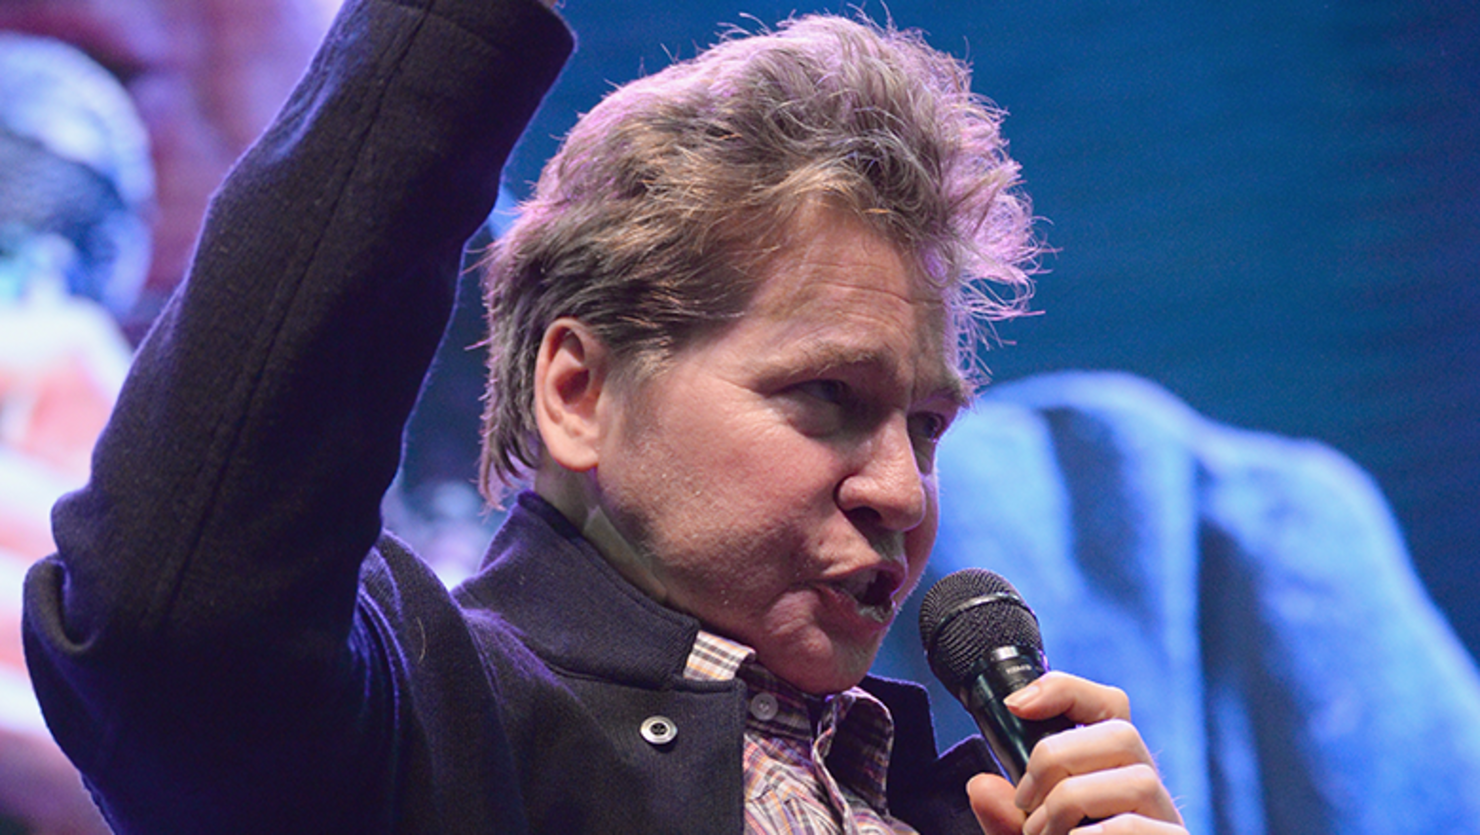 Val Kilmer Makes Rare Public Appearance After Battling Health Issues